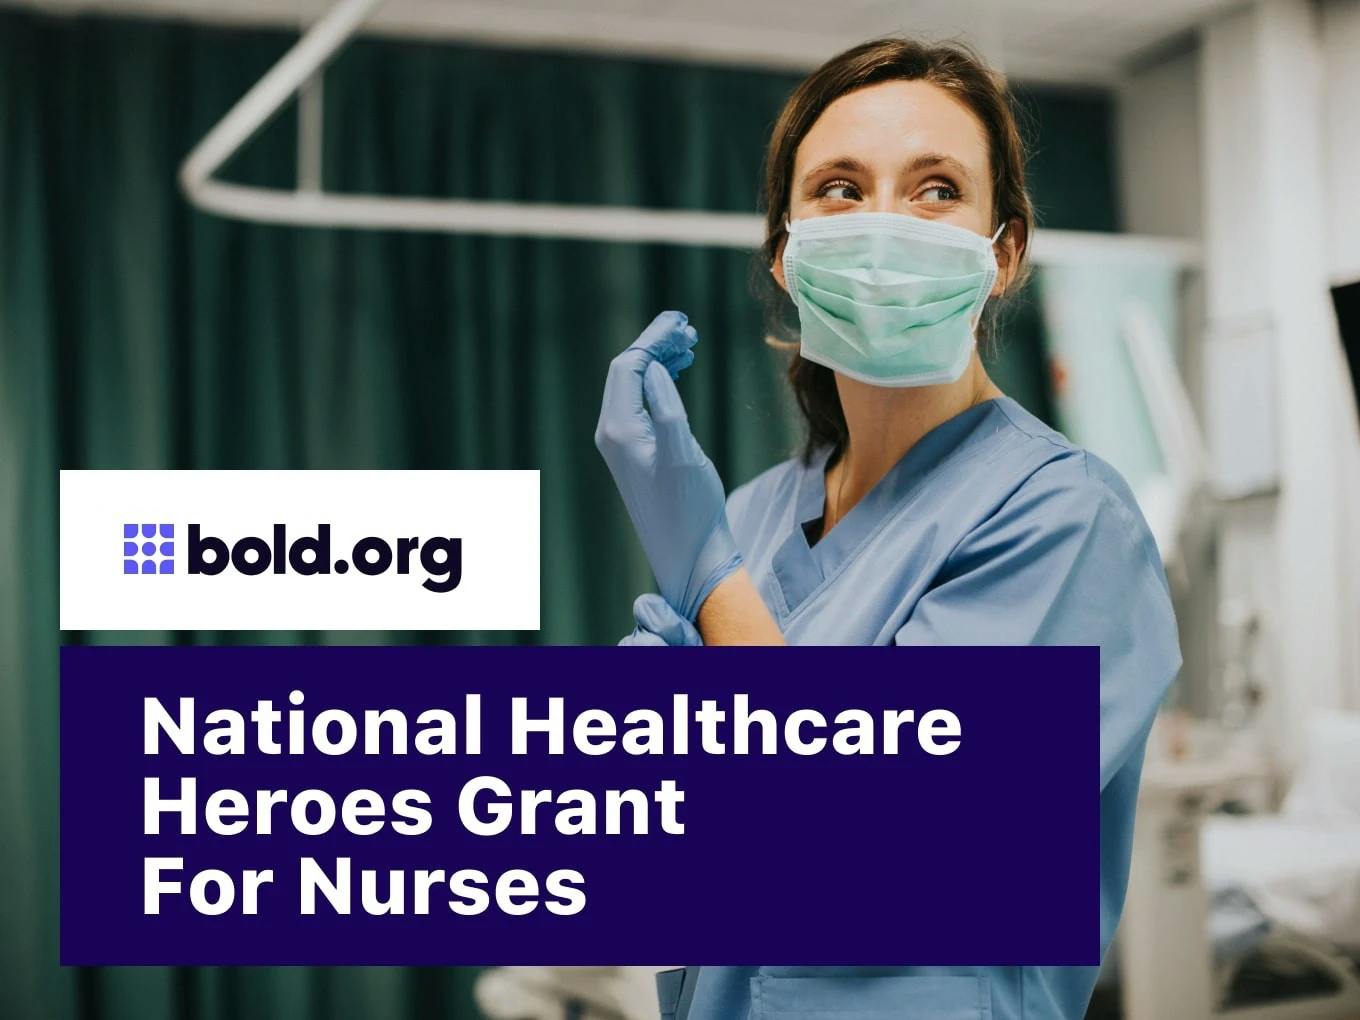 National Healthcare Heroes Grant for Nurses